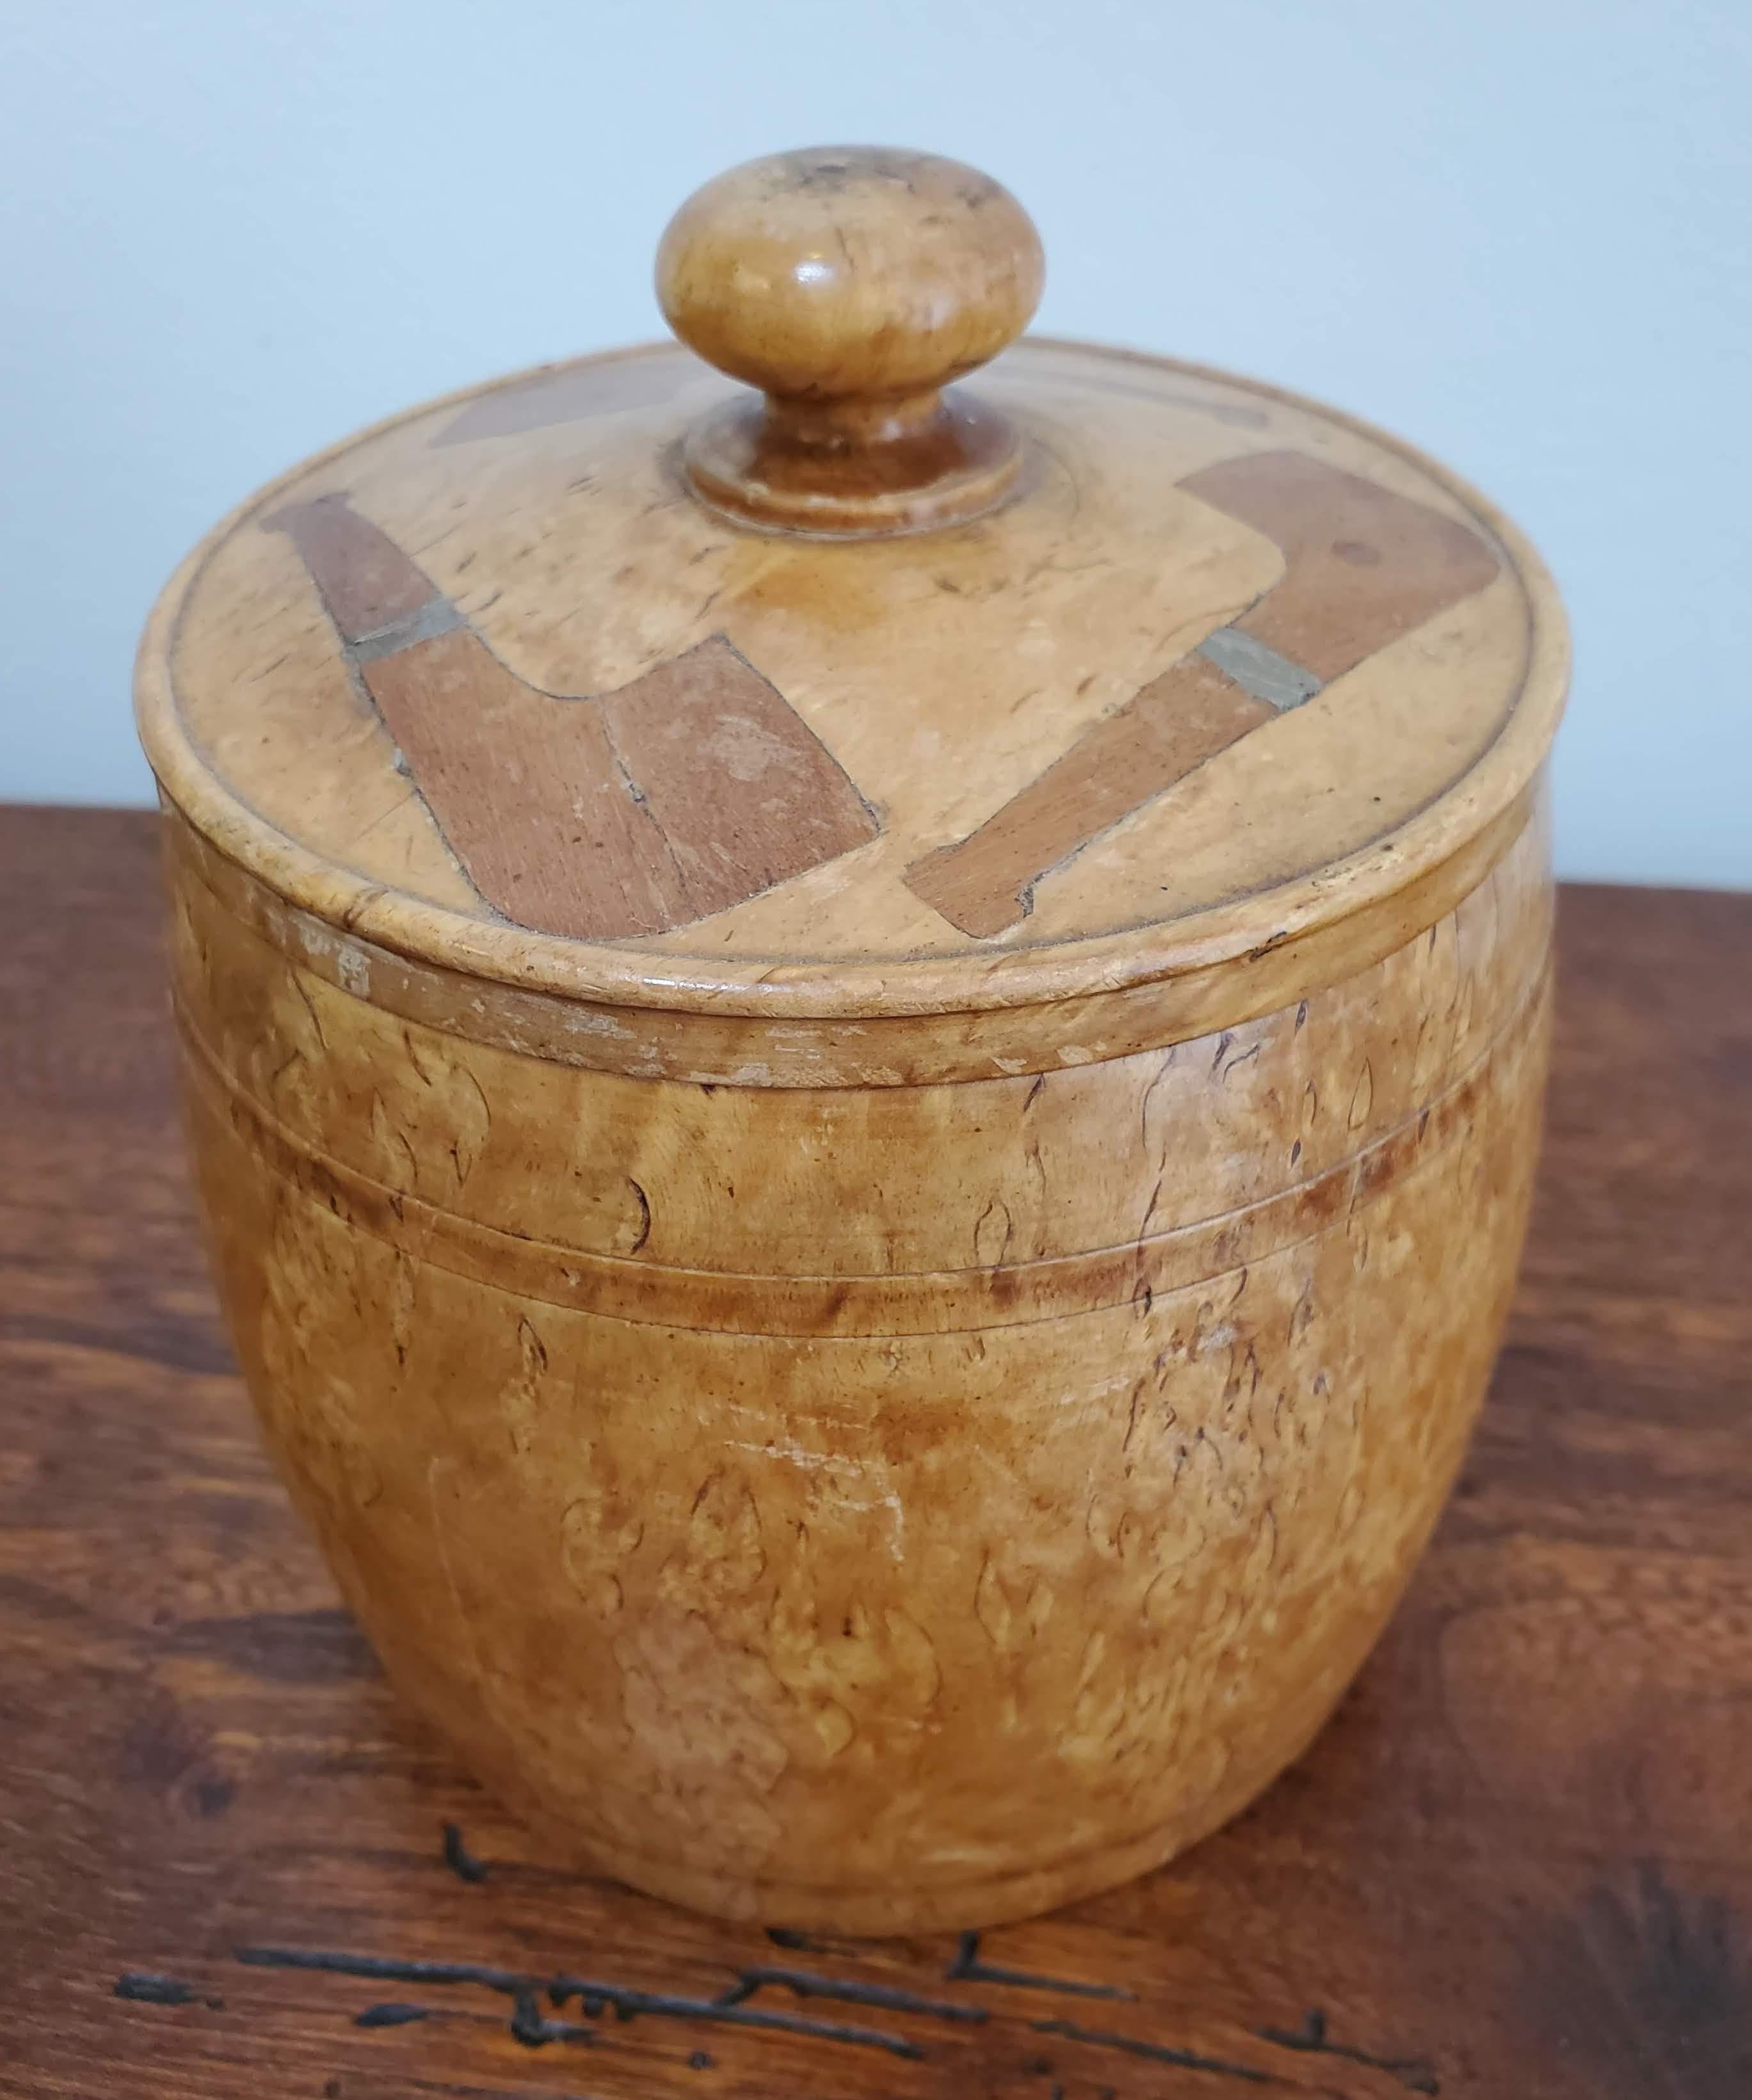 Smoking may be passé but collecting antique tobacco pieces is never bad for your health. This unique tobacco box in the shape of a barrel is made of highly figured burled birch wood with an inlay of mahogany and brass in the shape of pipes on the